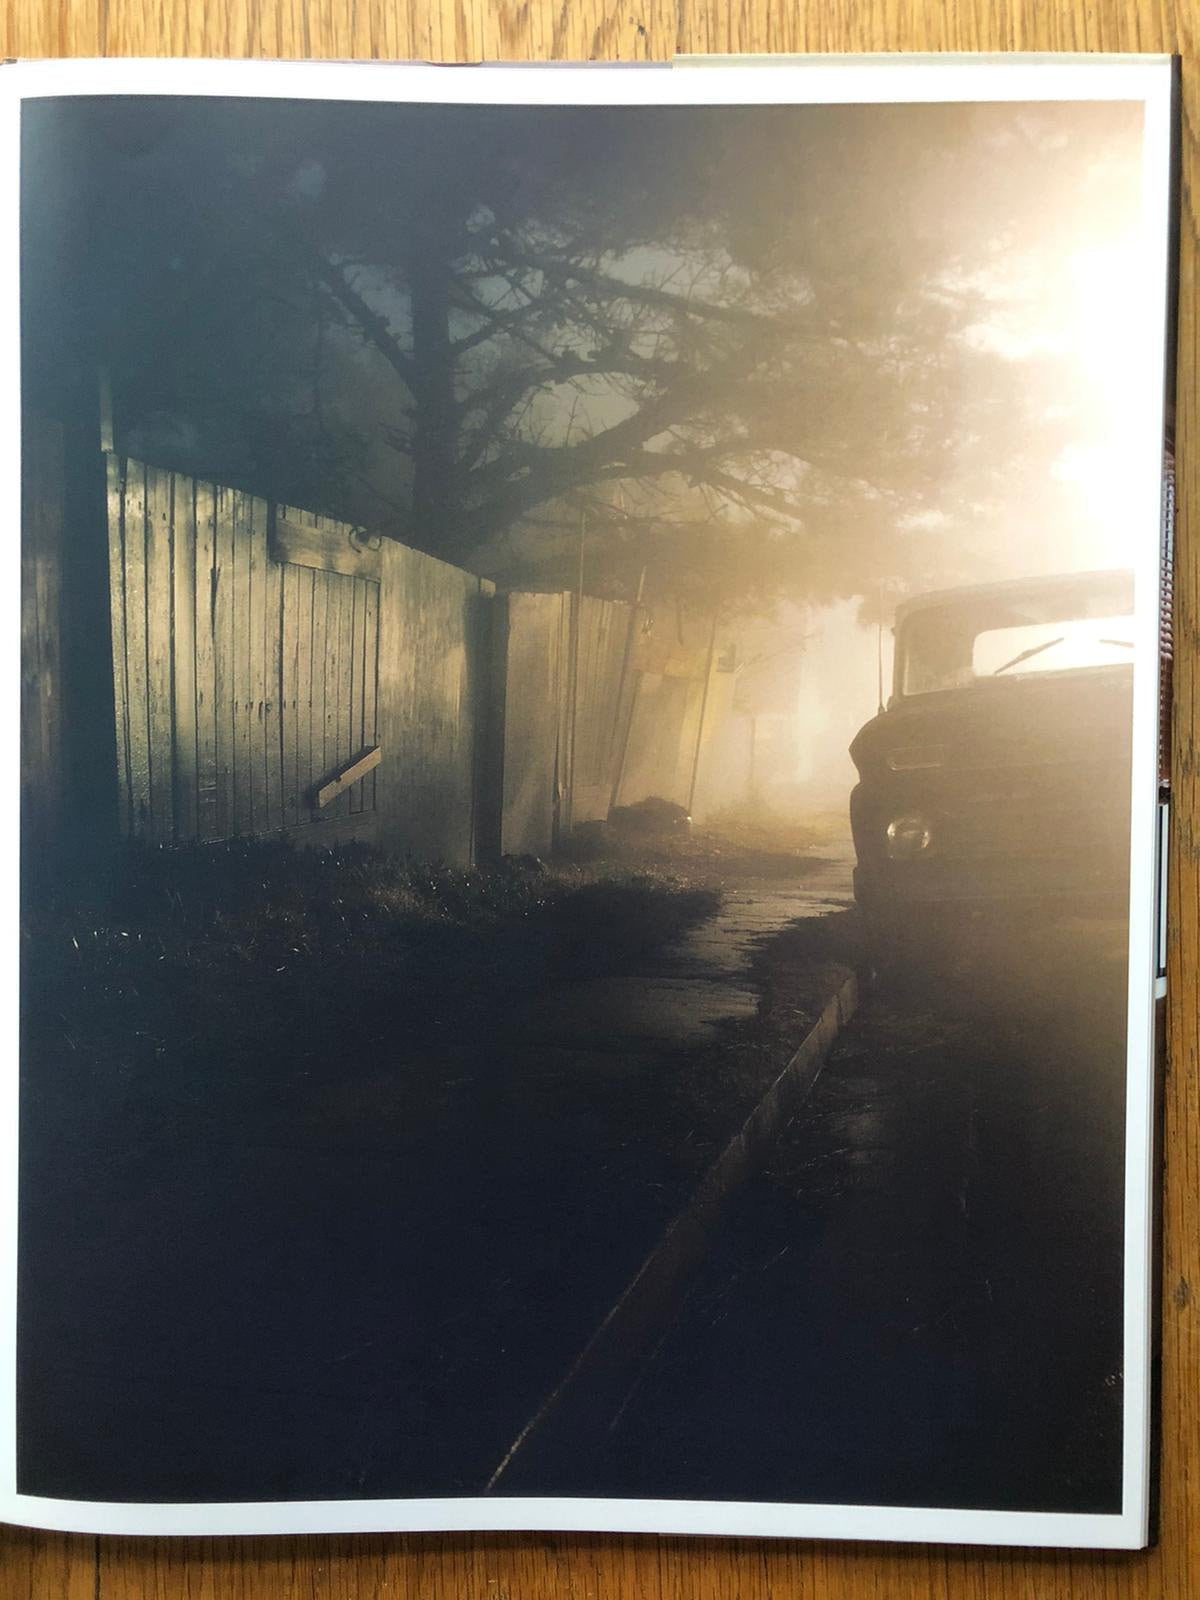 Buy House Hunting with print signed by Todd Hido special edition 